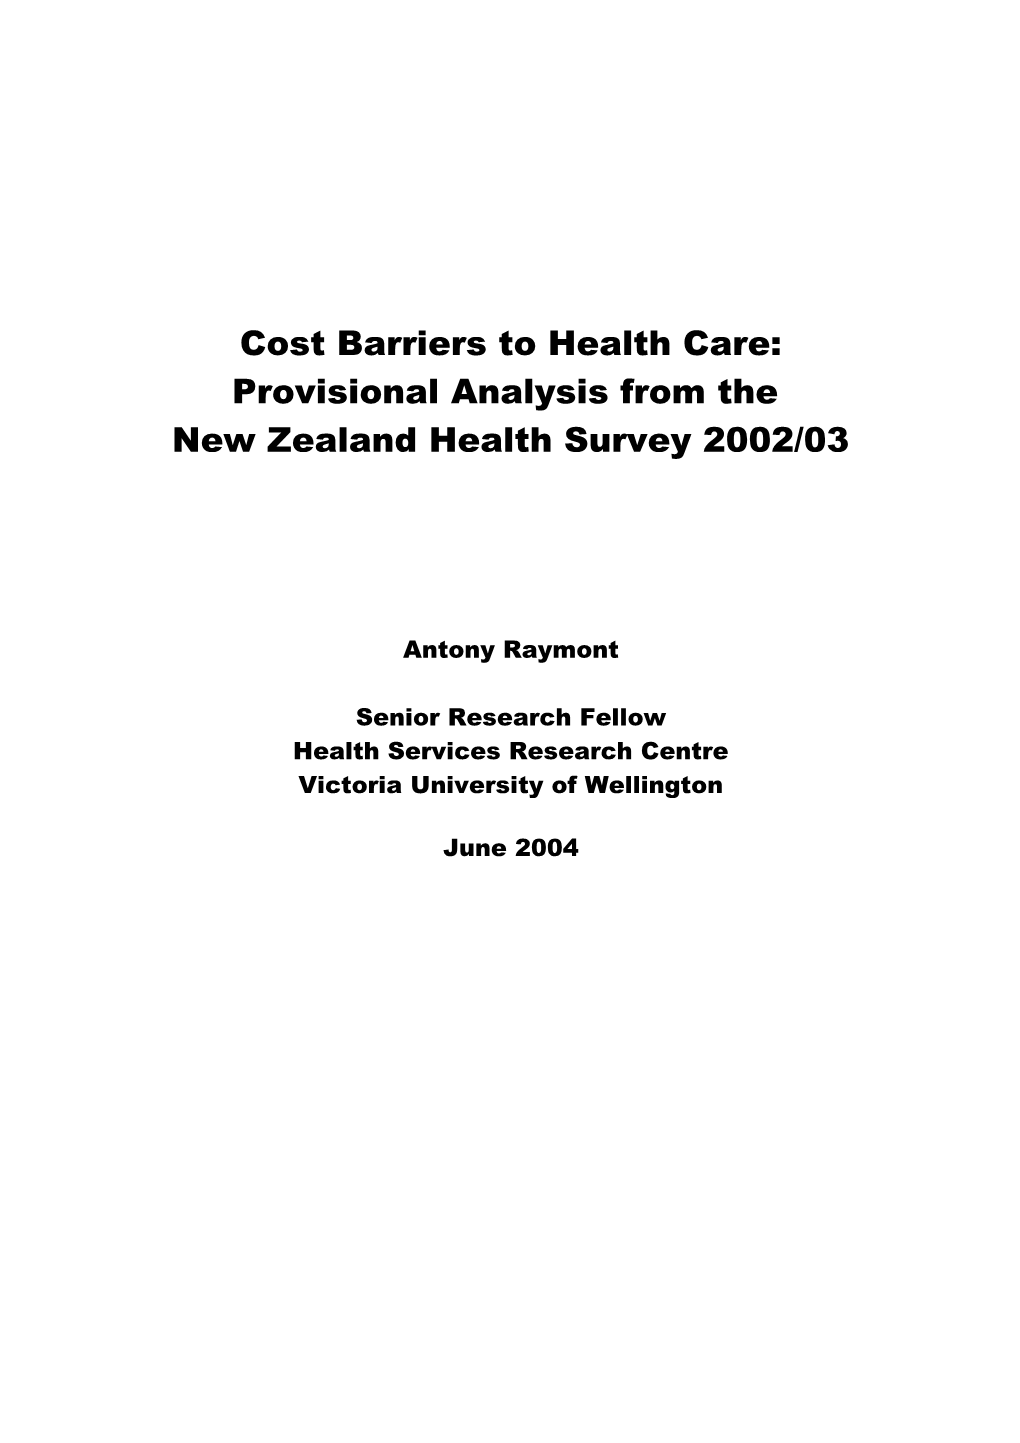 Cost Barriers to Health Care: Provisional Analysis from the New Zealand Health Survey 2002/03